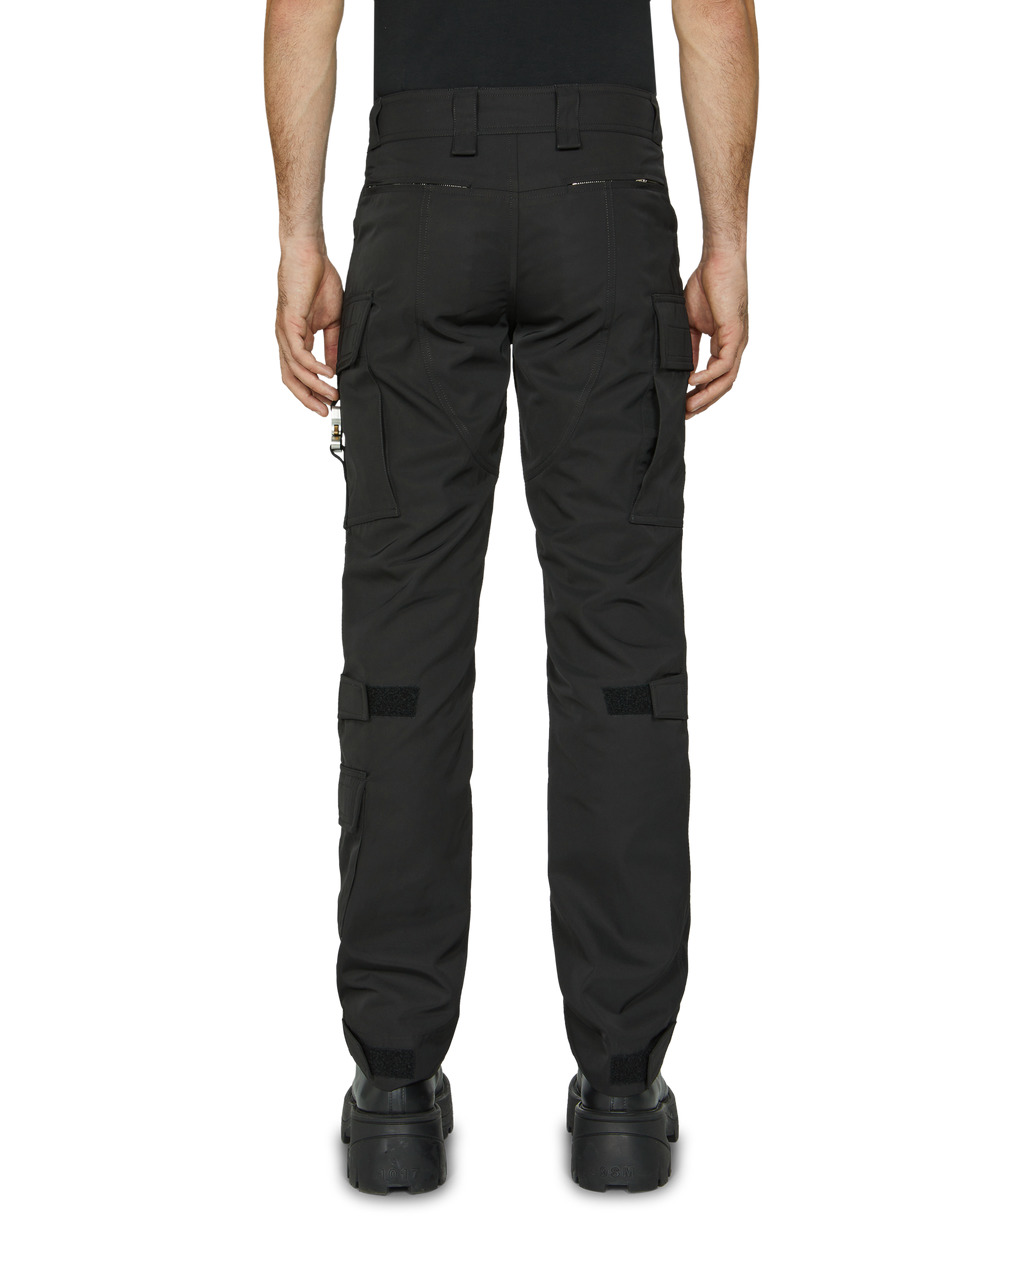 TACTICAL PANT WITH BUCKLE - 5